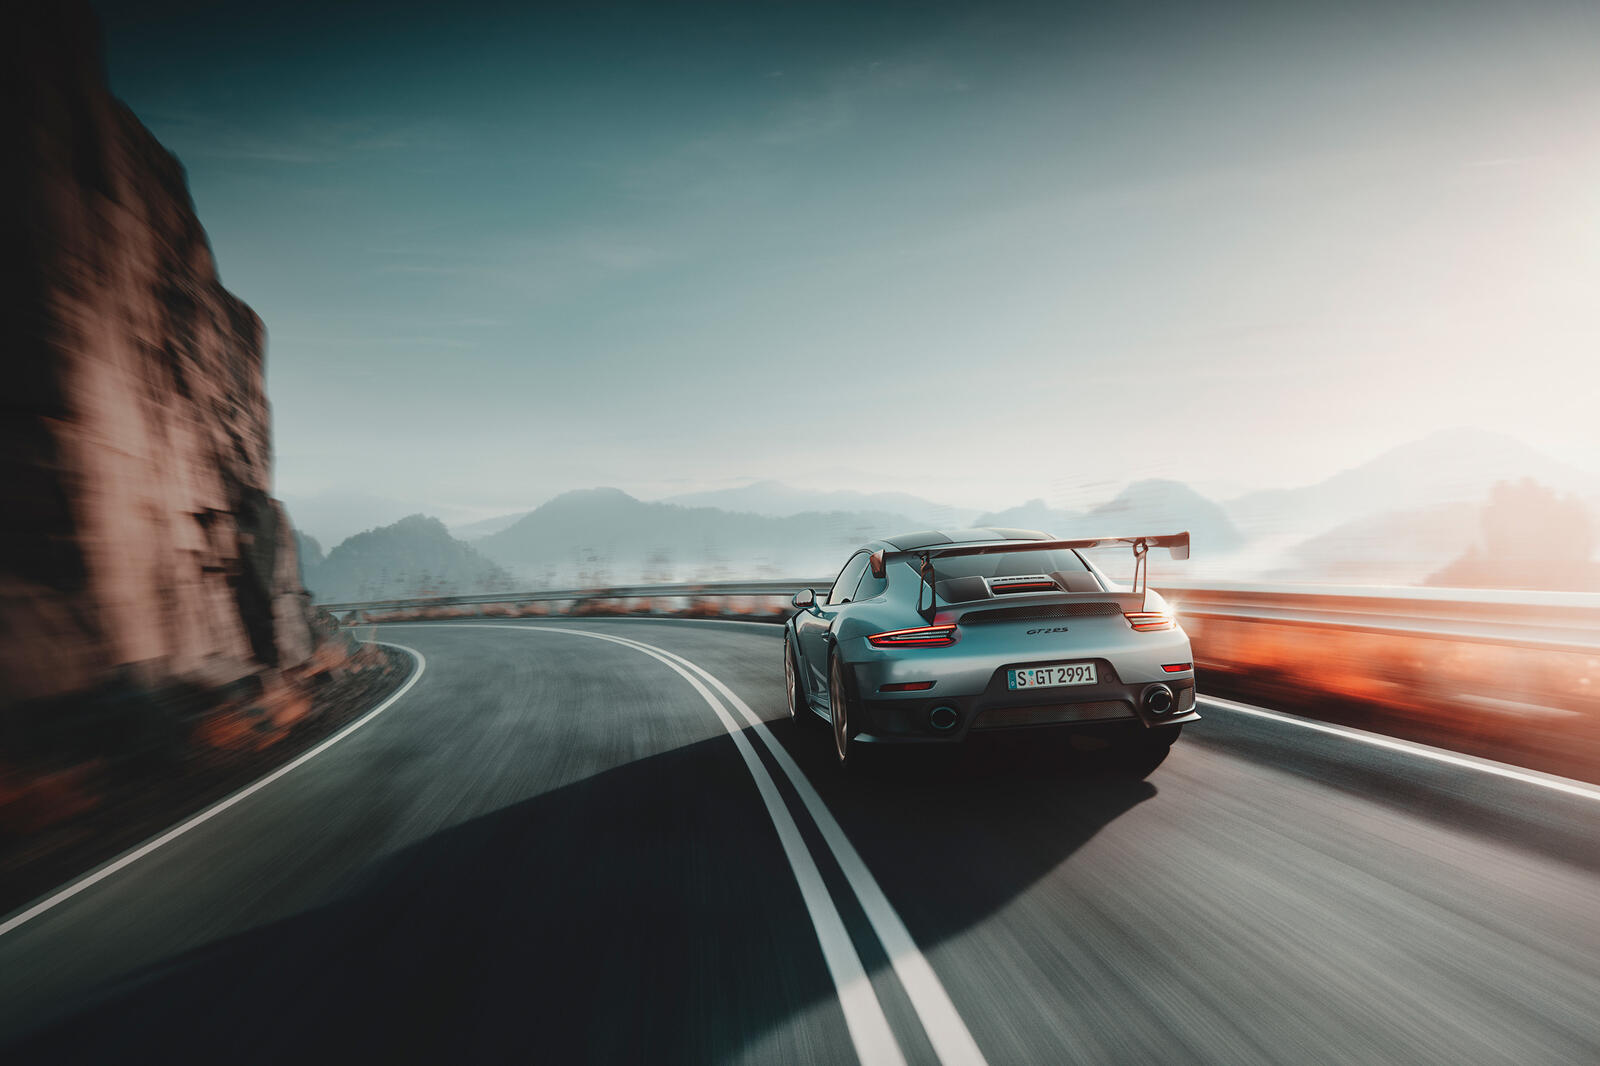 Free photo Silver Porsche 911 Gt2 rushes down the road on a mountain cliff